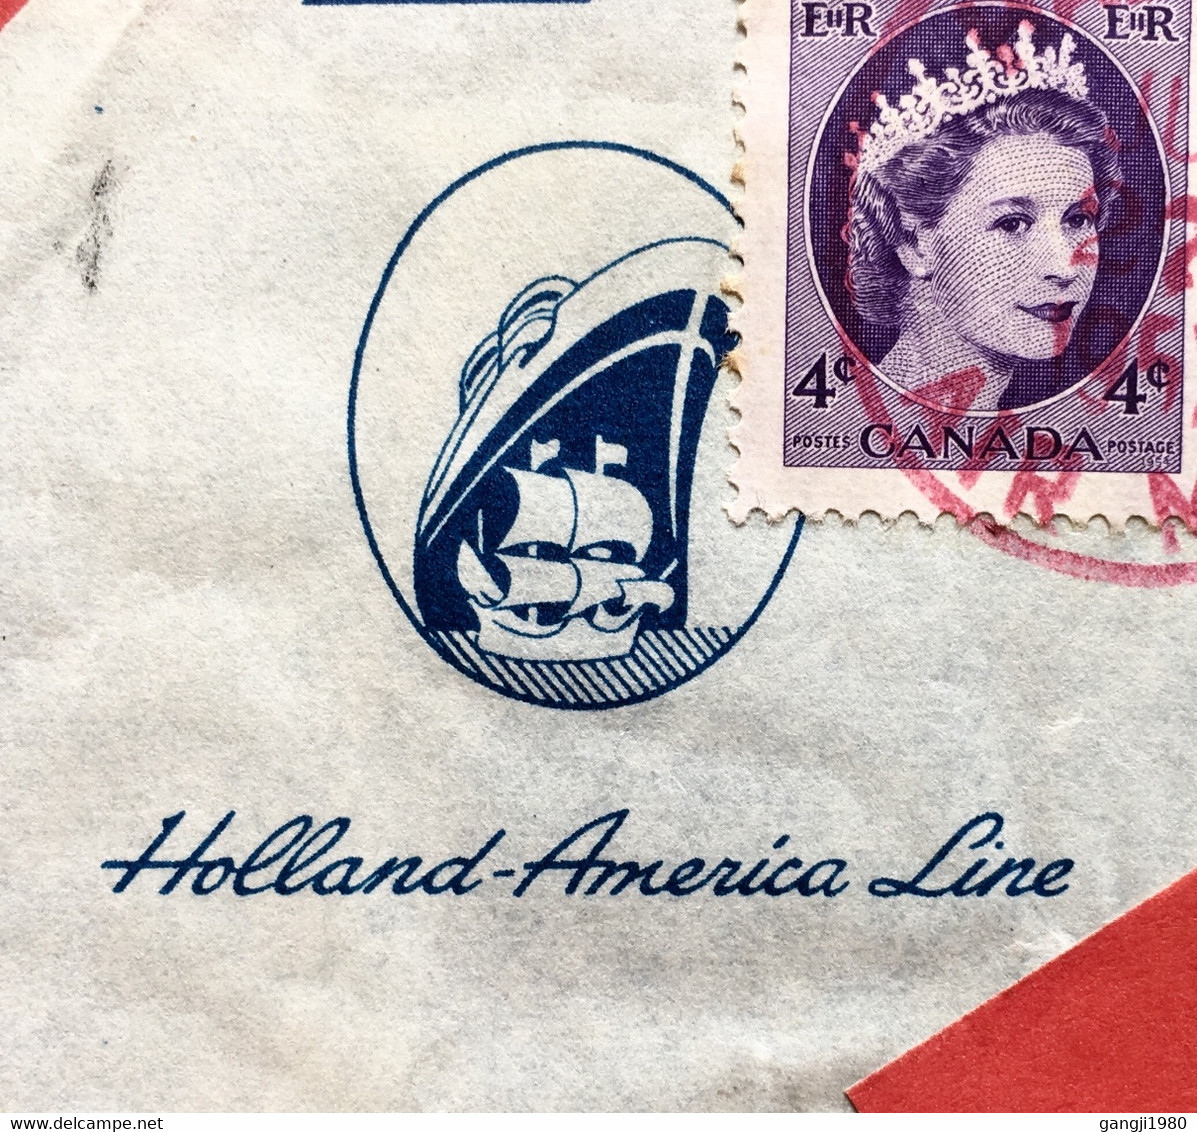 CANADA TO USA USED COVER 1957, VIGNETTE “SPECIAL DELIVERY EXPRESS” 1955 PRINT “HOLLAND-AMERICA LINE” HALIFEX RED CANCEL. - Luftpost-Express